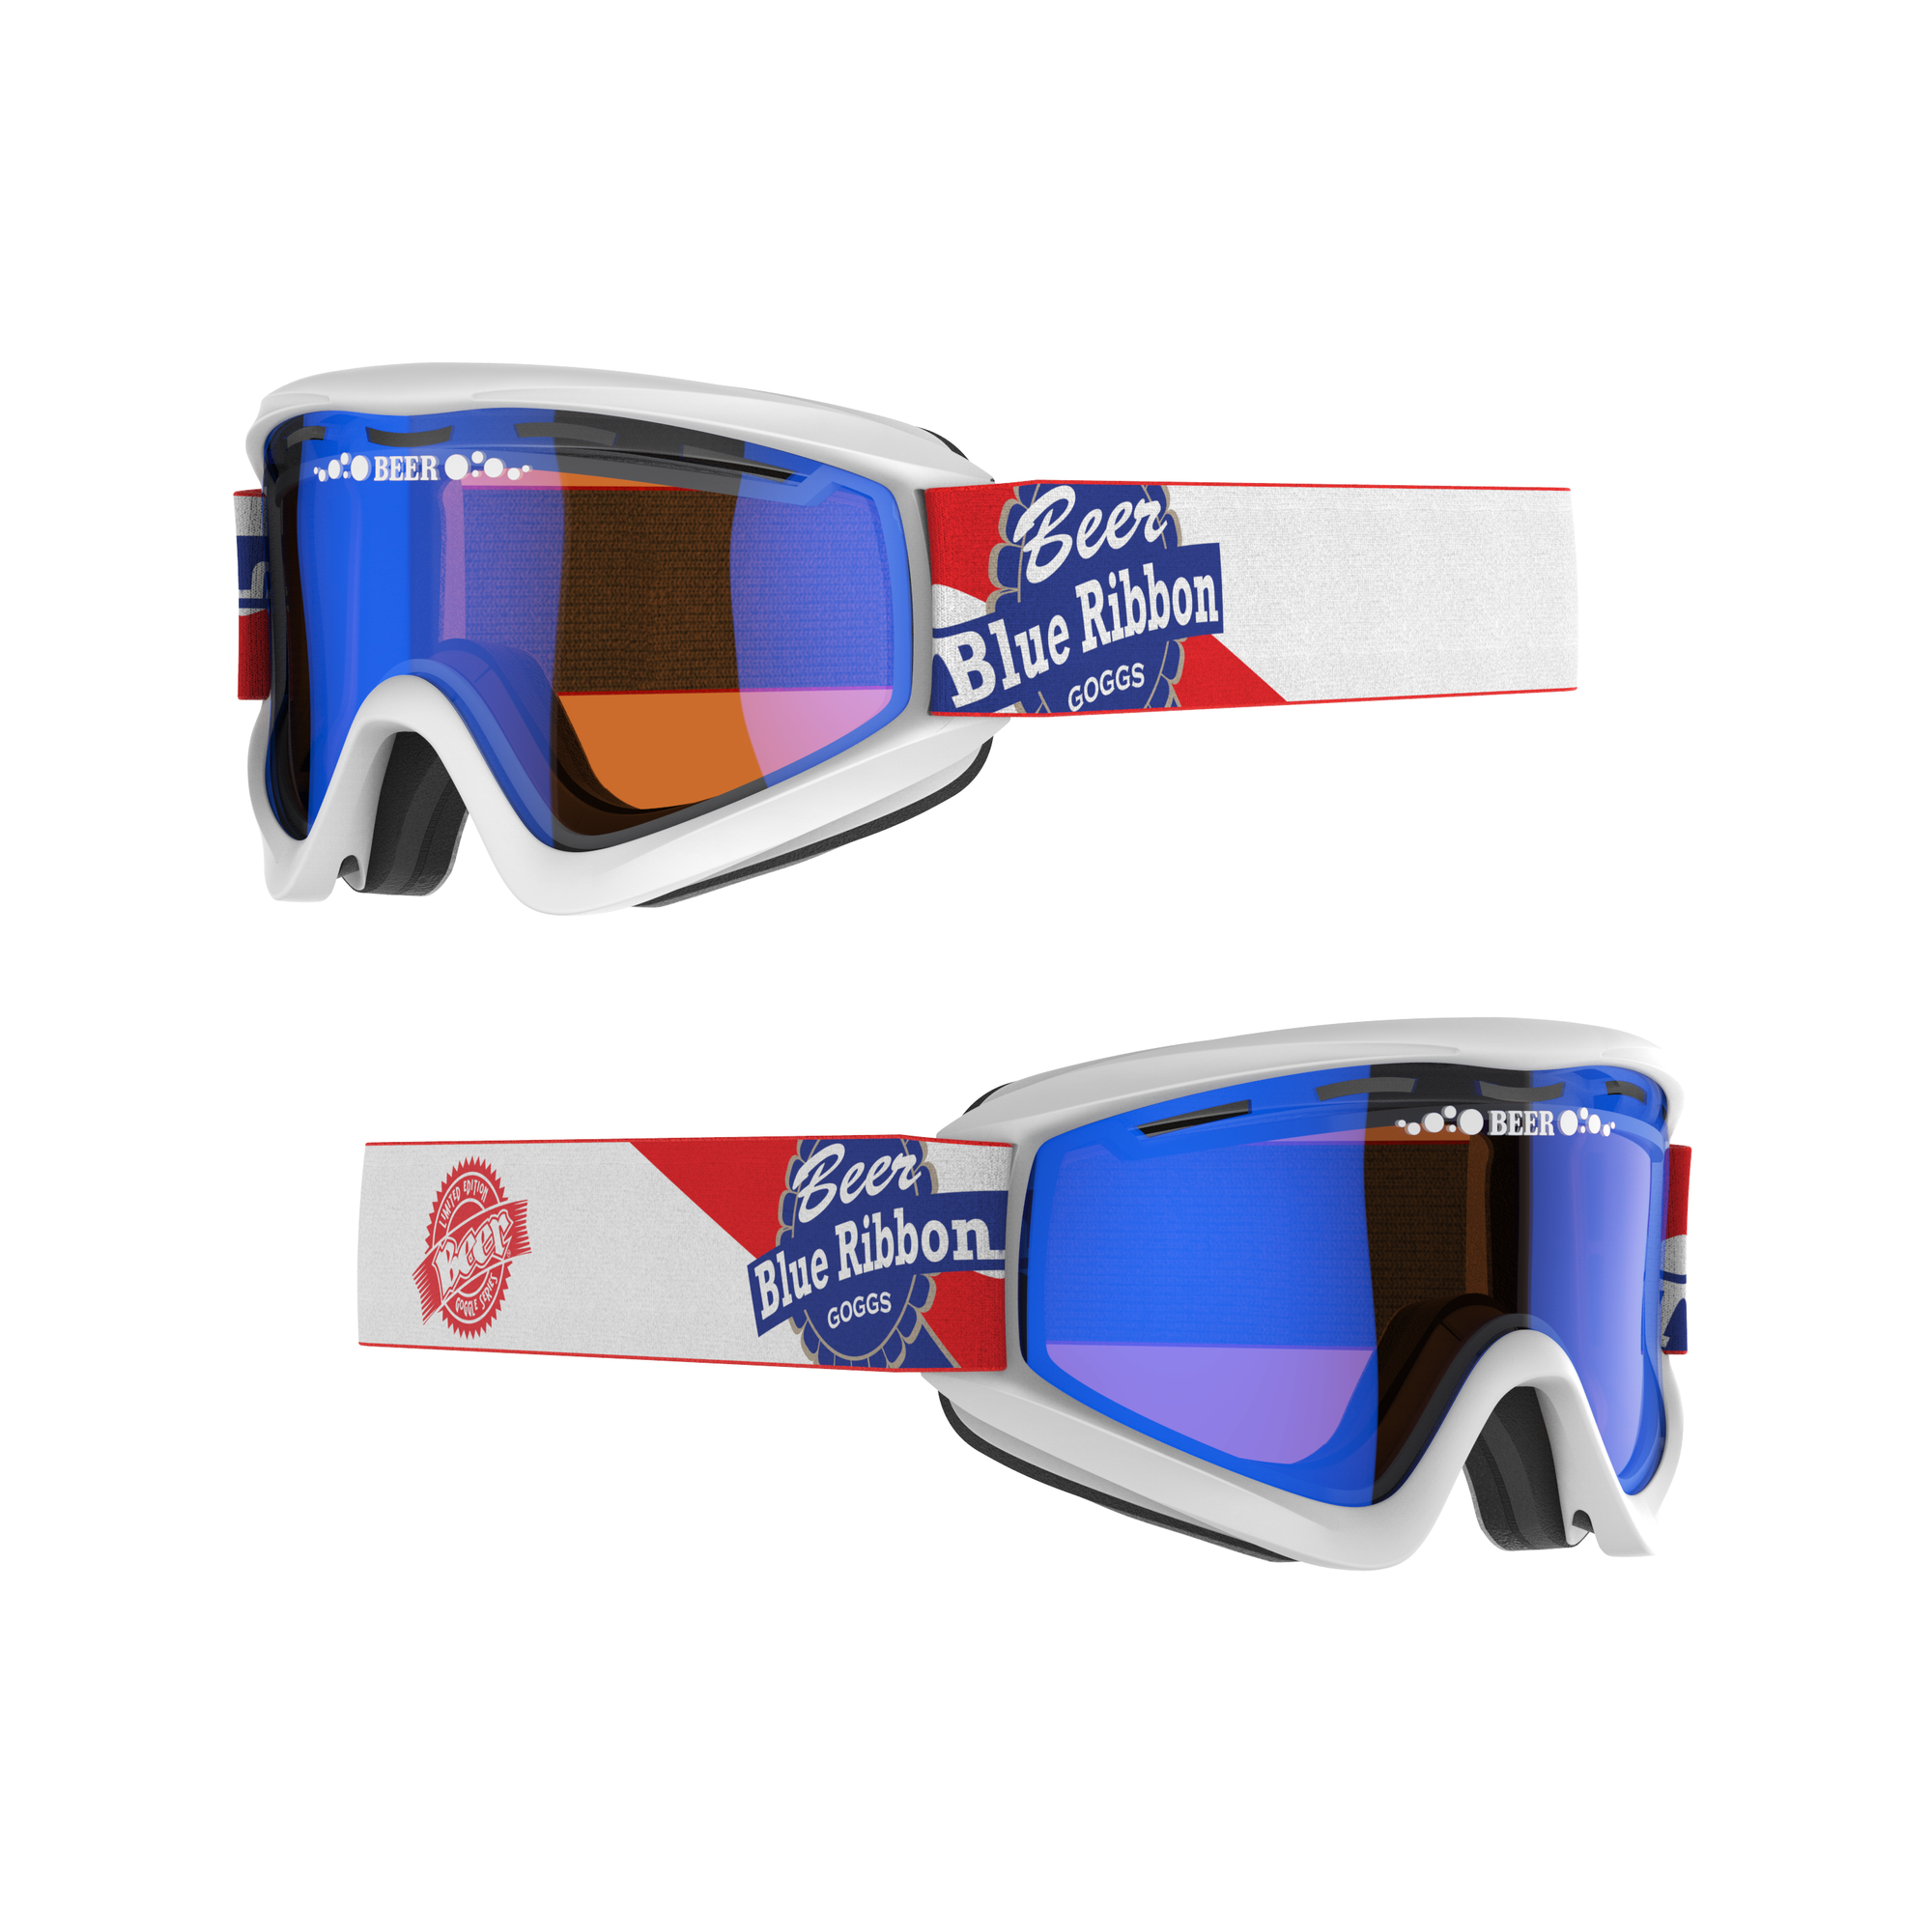 BEER GOGGLES COLD BEER "PBR"